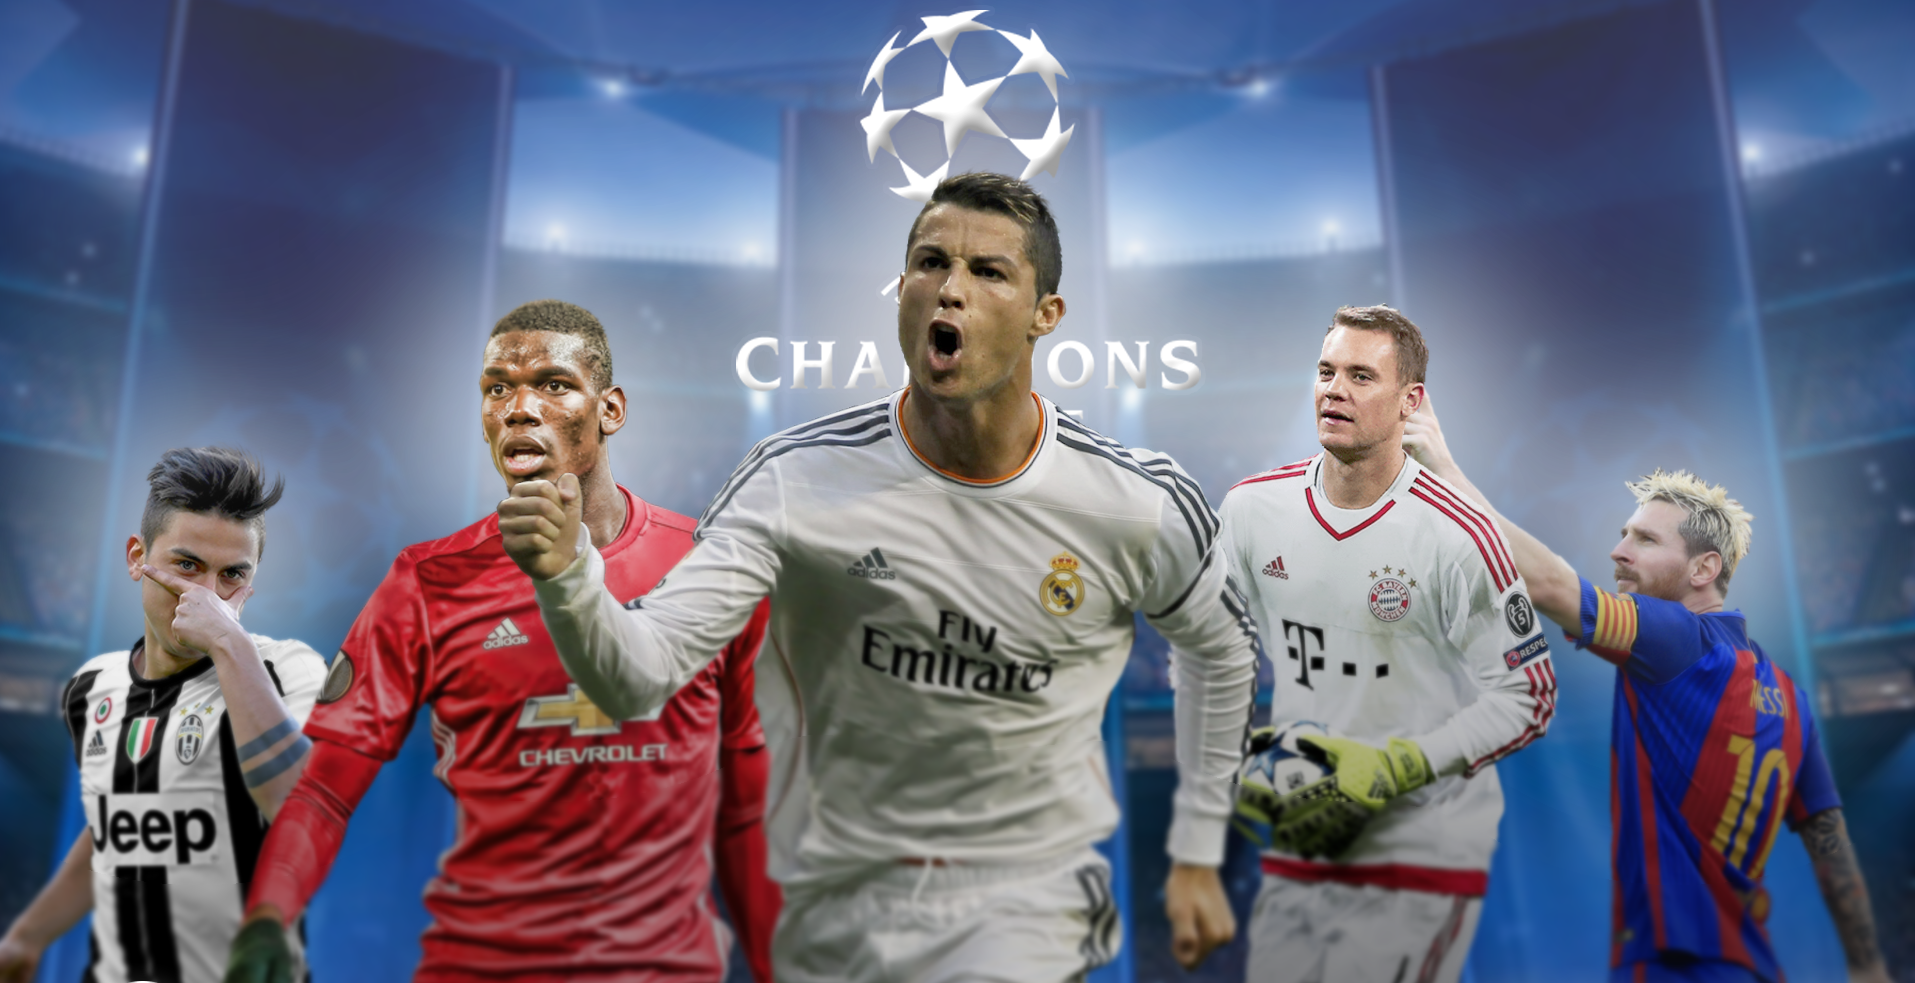 Team-uefa Champions League Wallpapers - Coupe Champions League 2018 - HD Wallpaper 